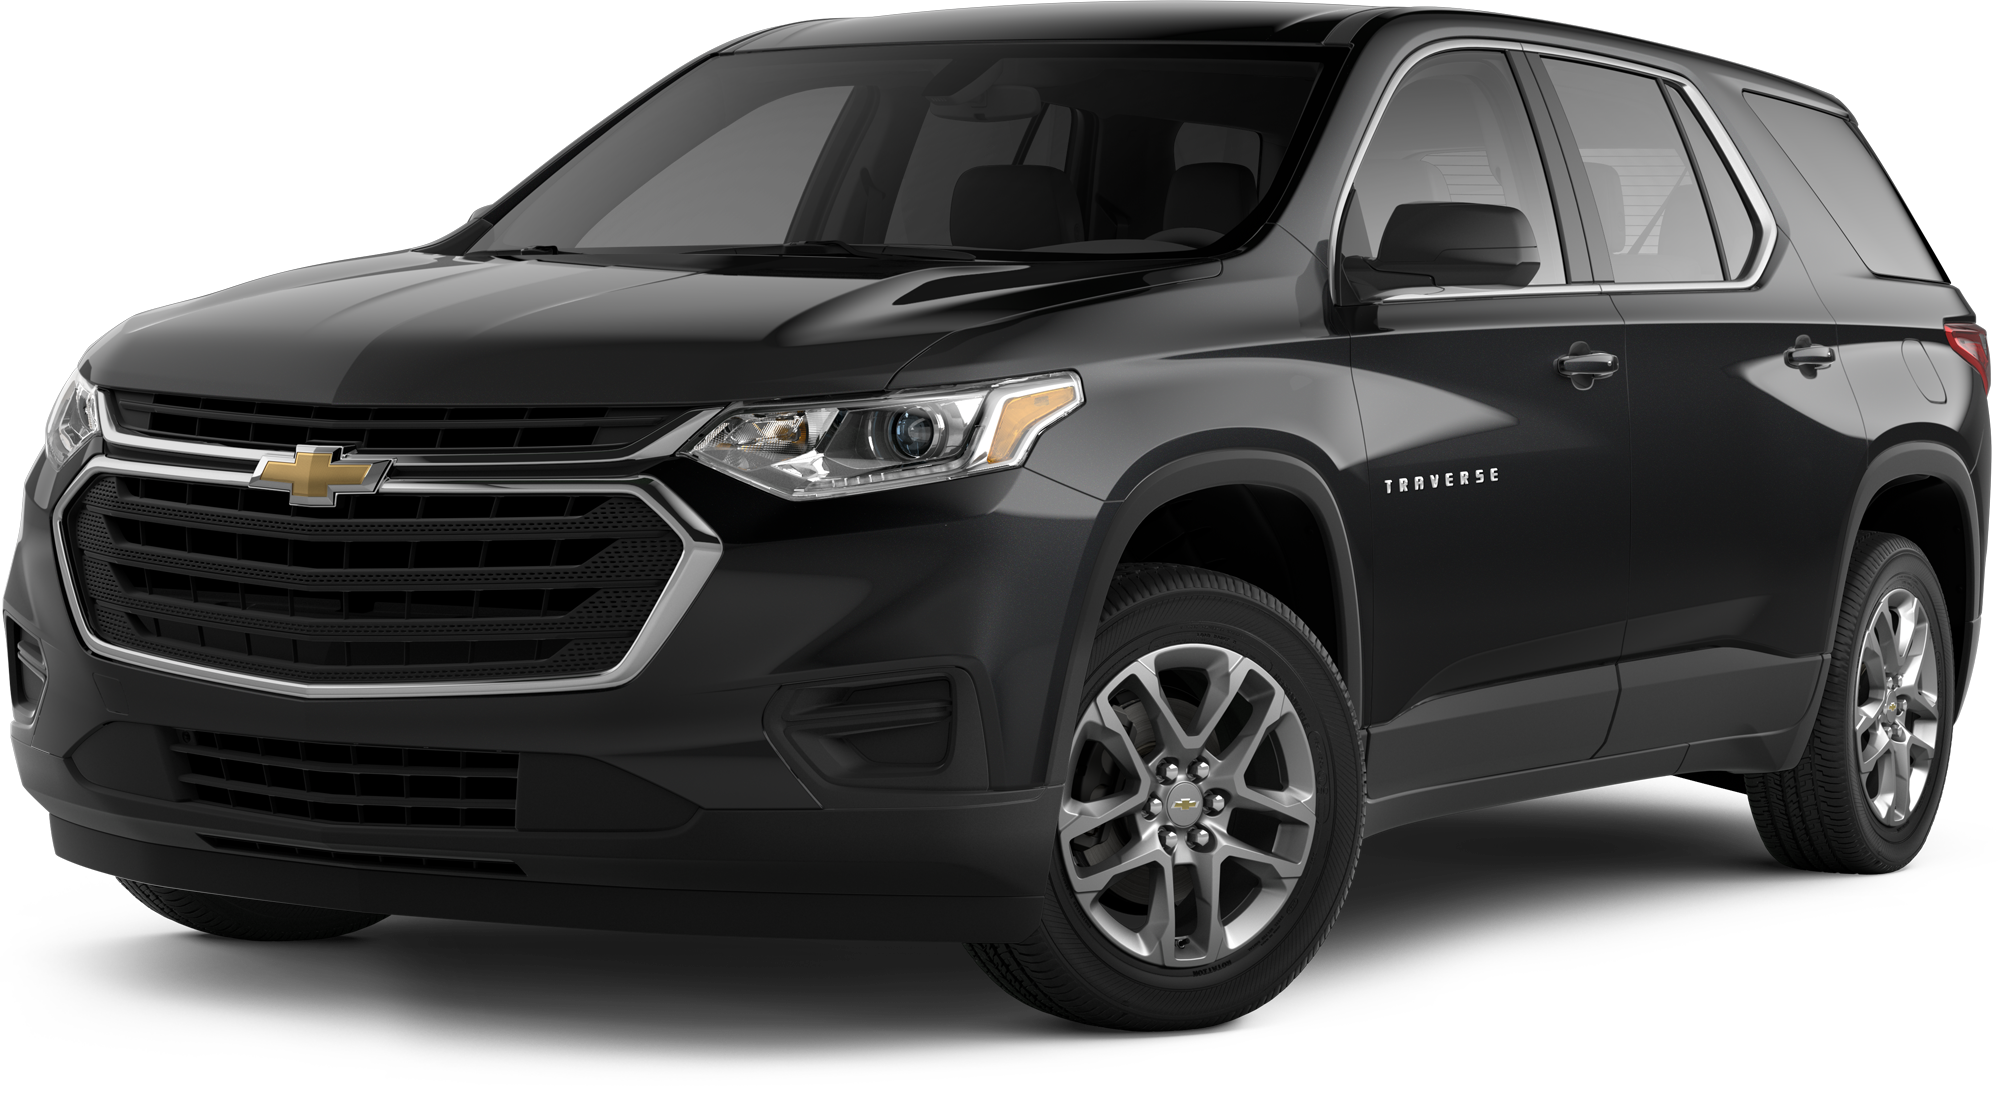 2020-chevrolet-traverse-incentives-specials-offers-in-scottsdale-az